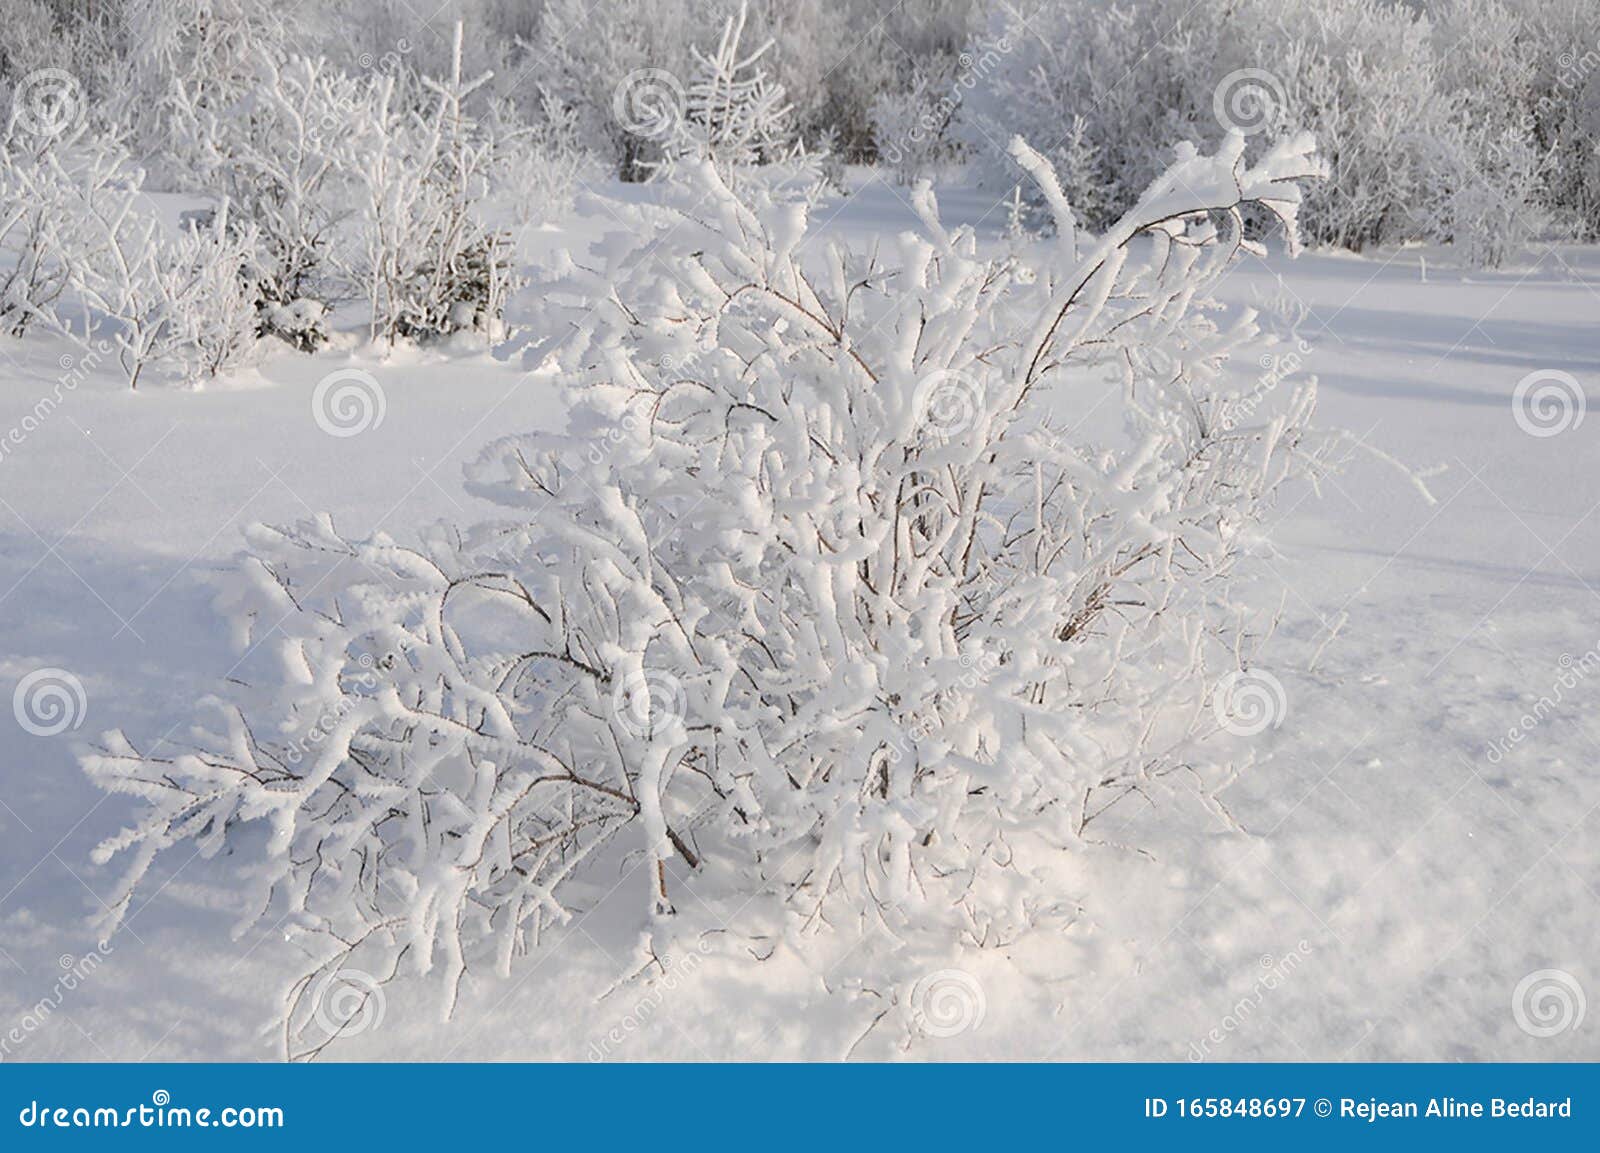 Scenery Winter Photo. Winter Scenery Displaying Snow on Frosted Trees